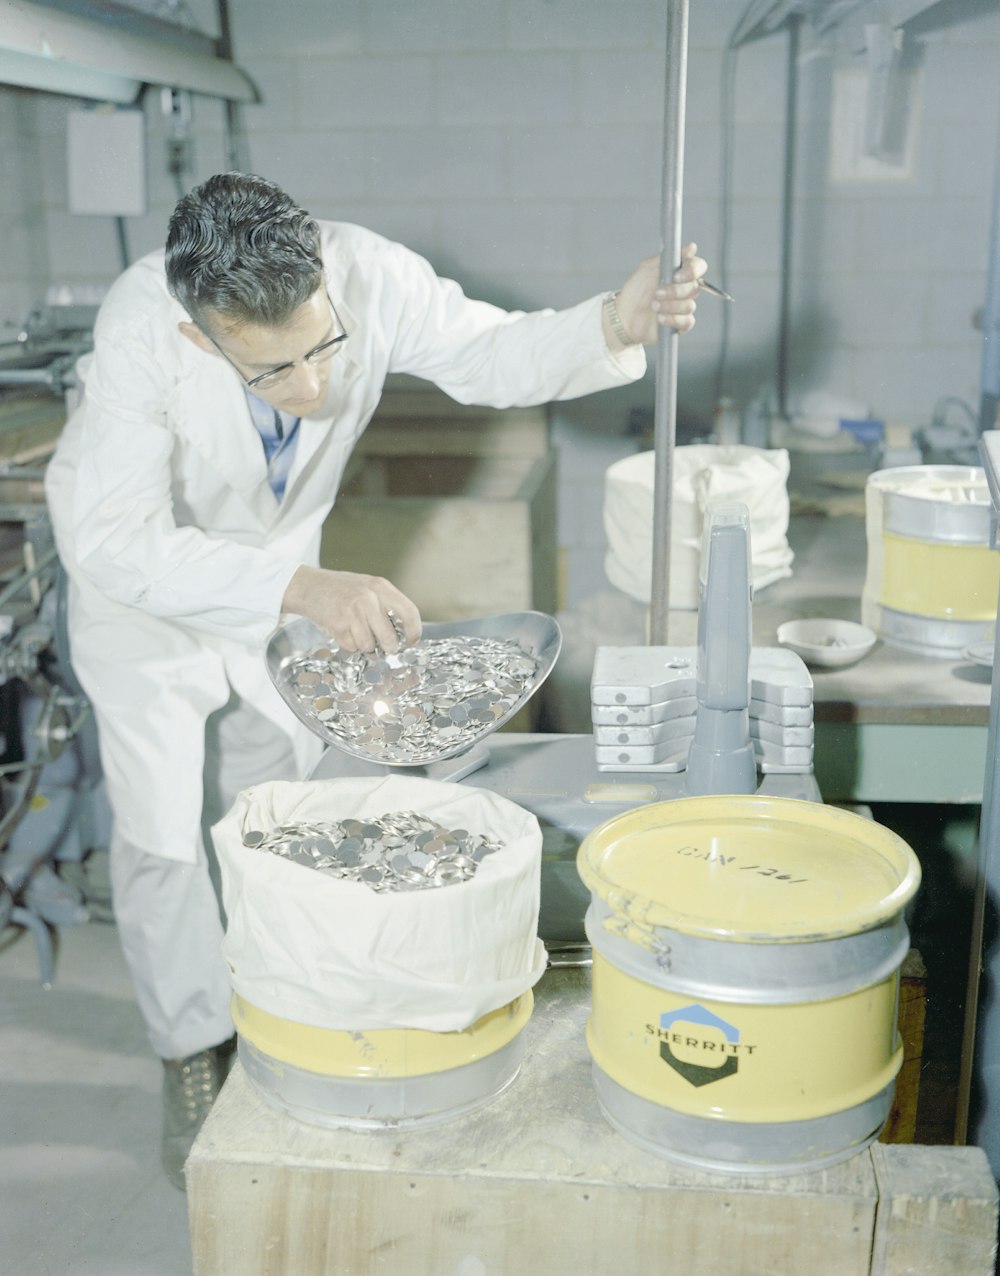 a man in a white lab coat working on a cake